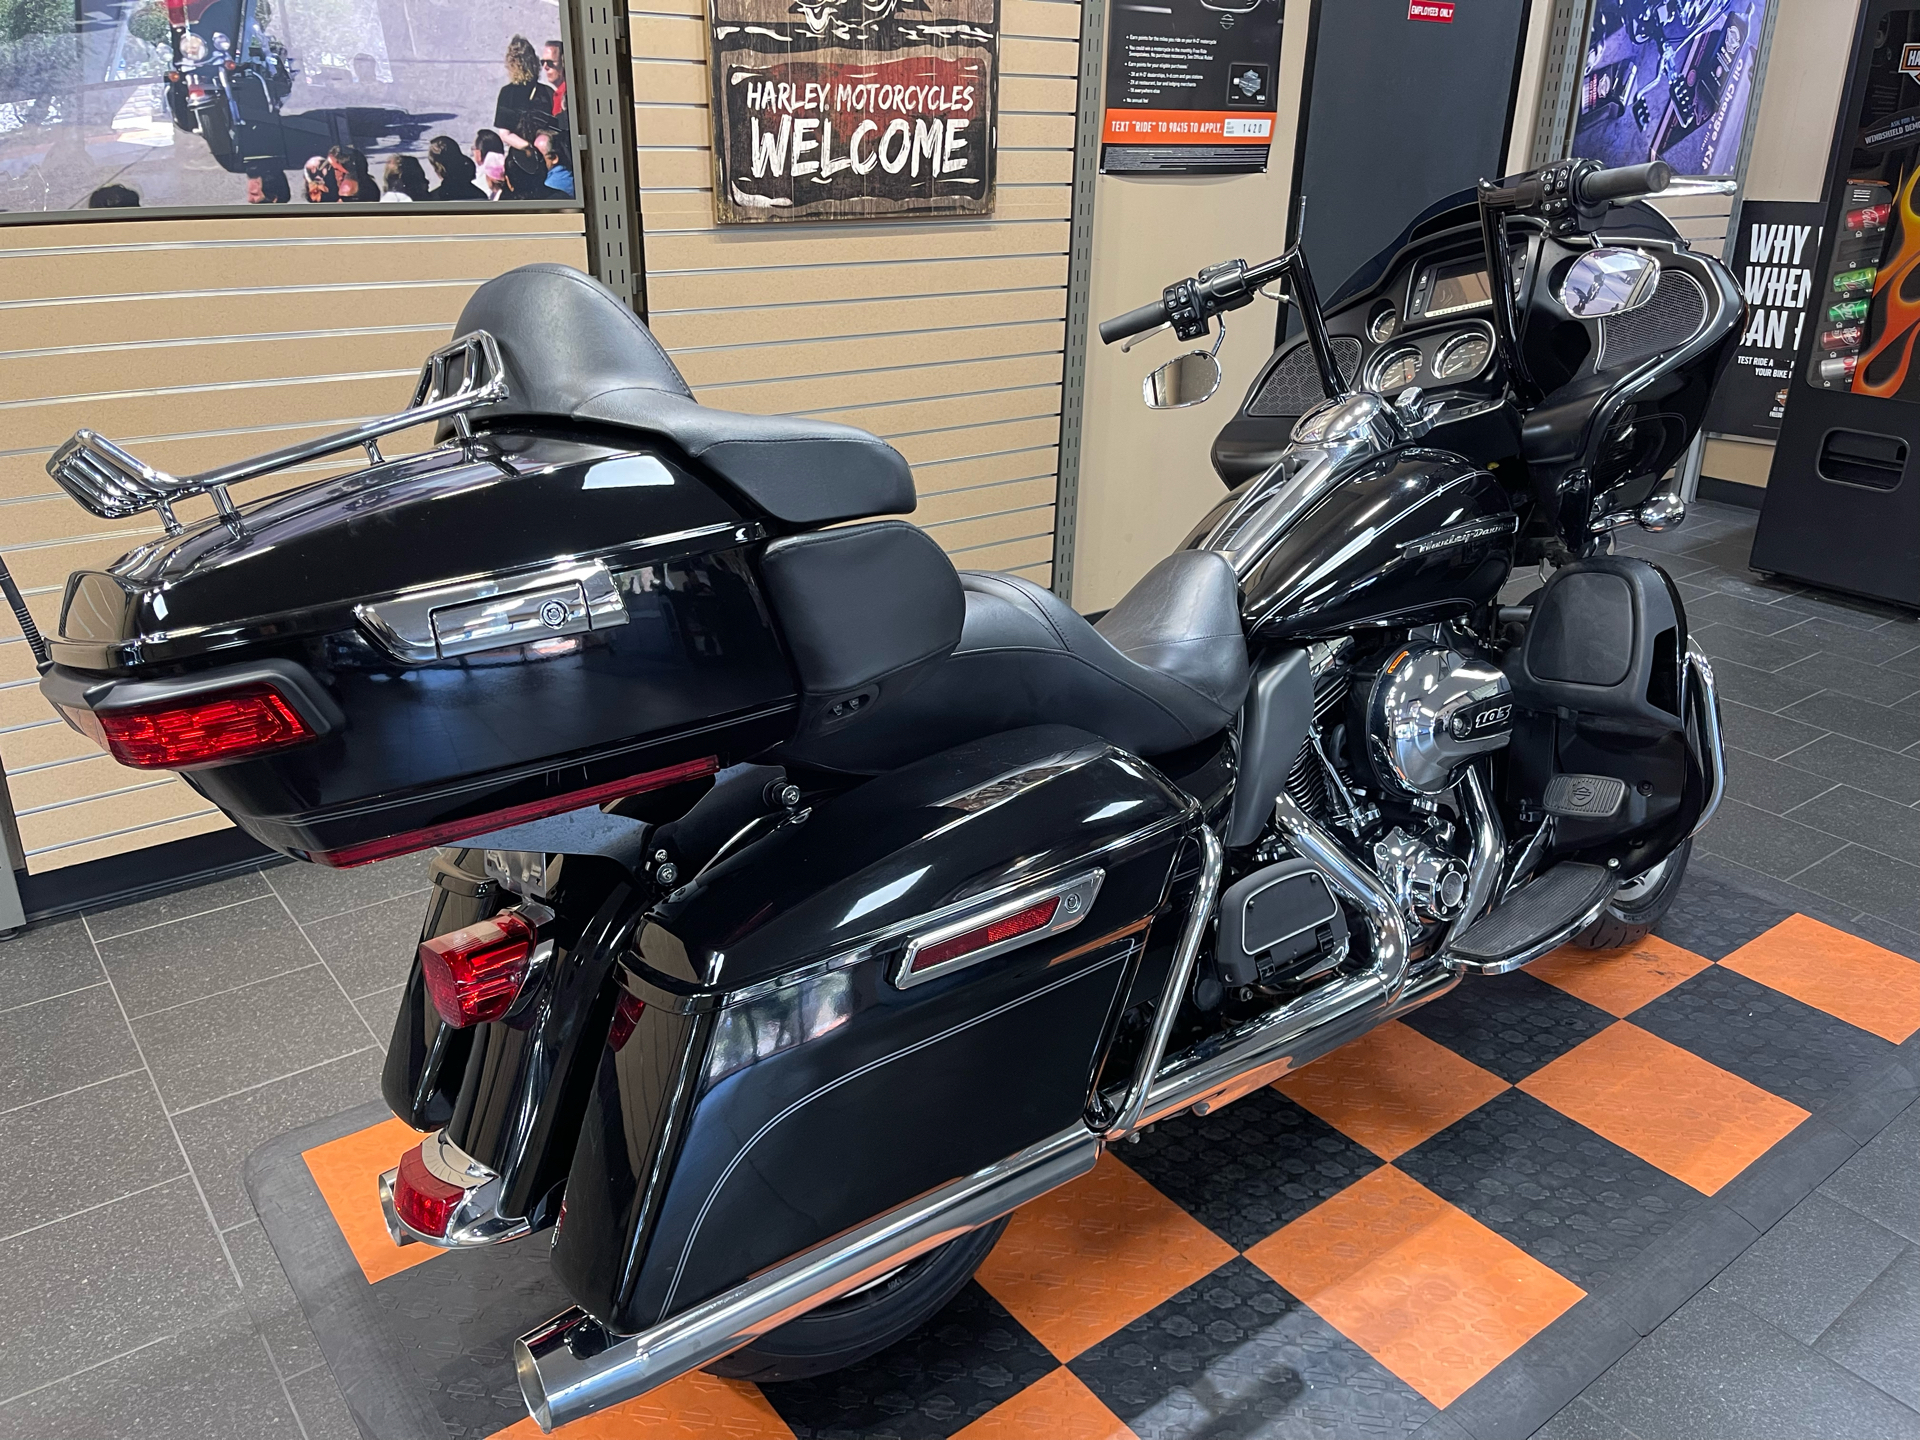 2016 Harley-Davidson Road Glide® Ultra in The Woodlands, Texas - Photo 6